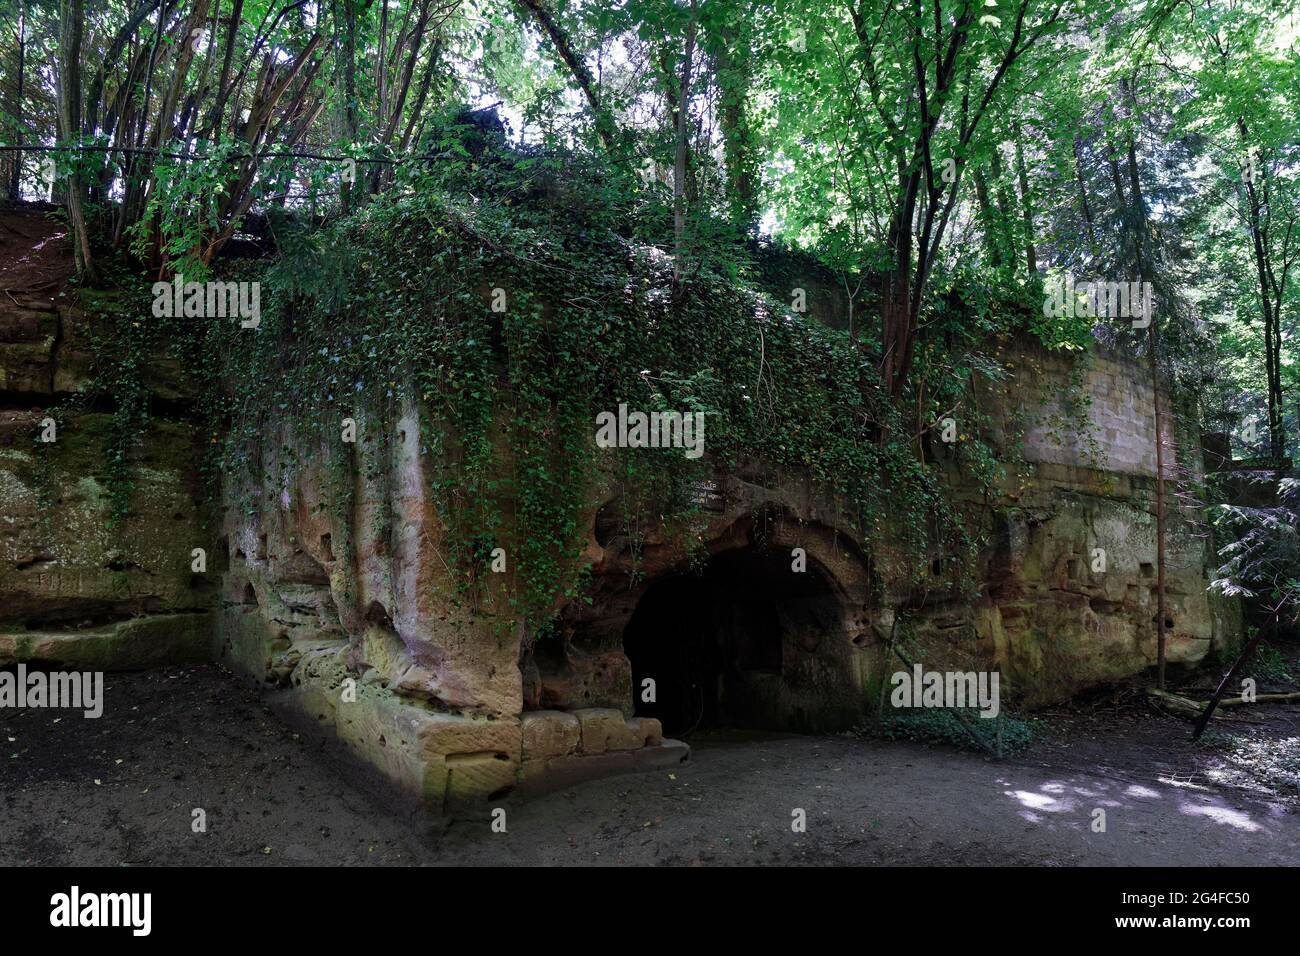 Lion pit, artificial rock cellar, geotope, city of Altdorf, Middle Franconia, Franconia, Bavaria, Germany Stock Photo